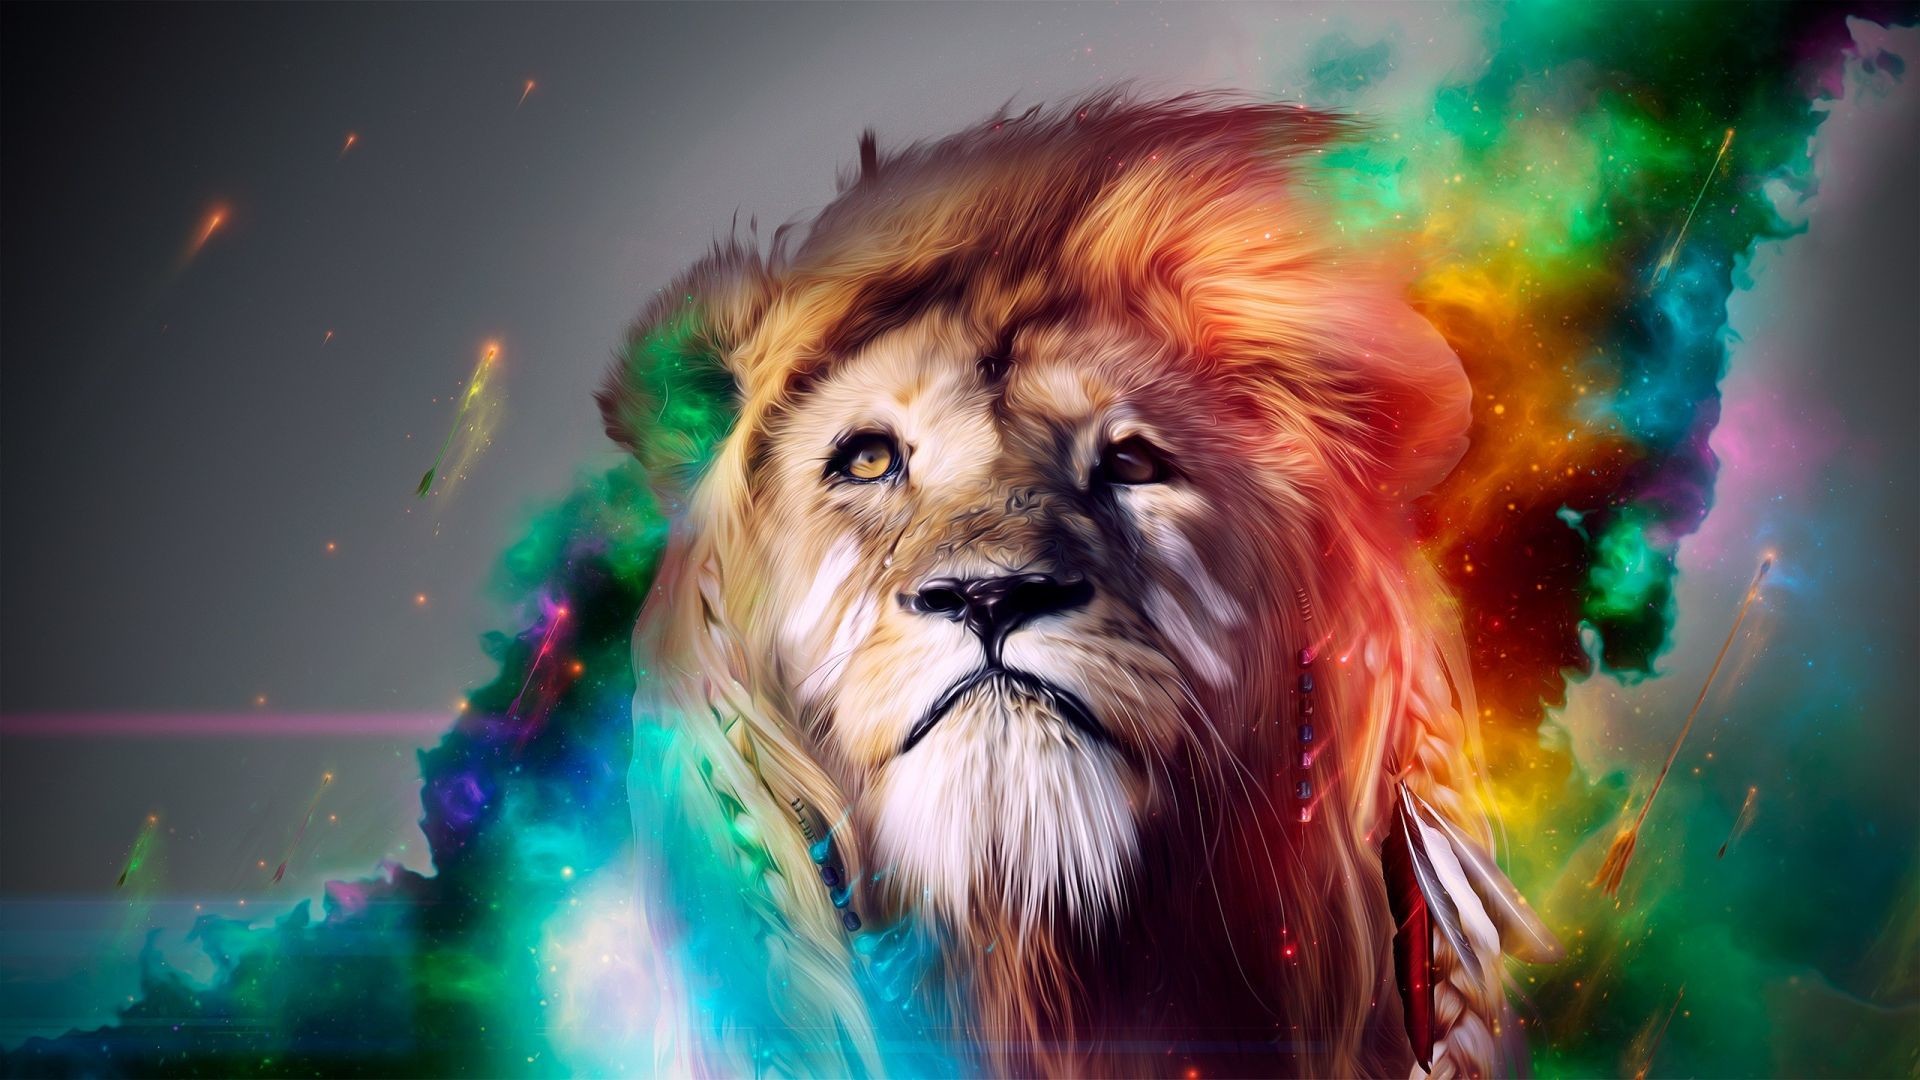 1920x1080 3D Abstract Fantasy Lion Wallpaper | HD 3D and Abstract Wallpaper Free  Download ...